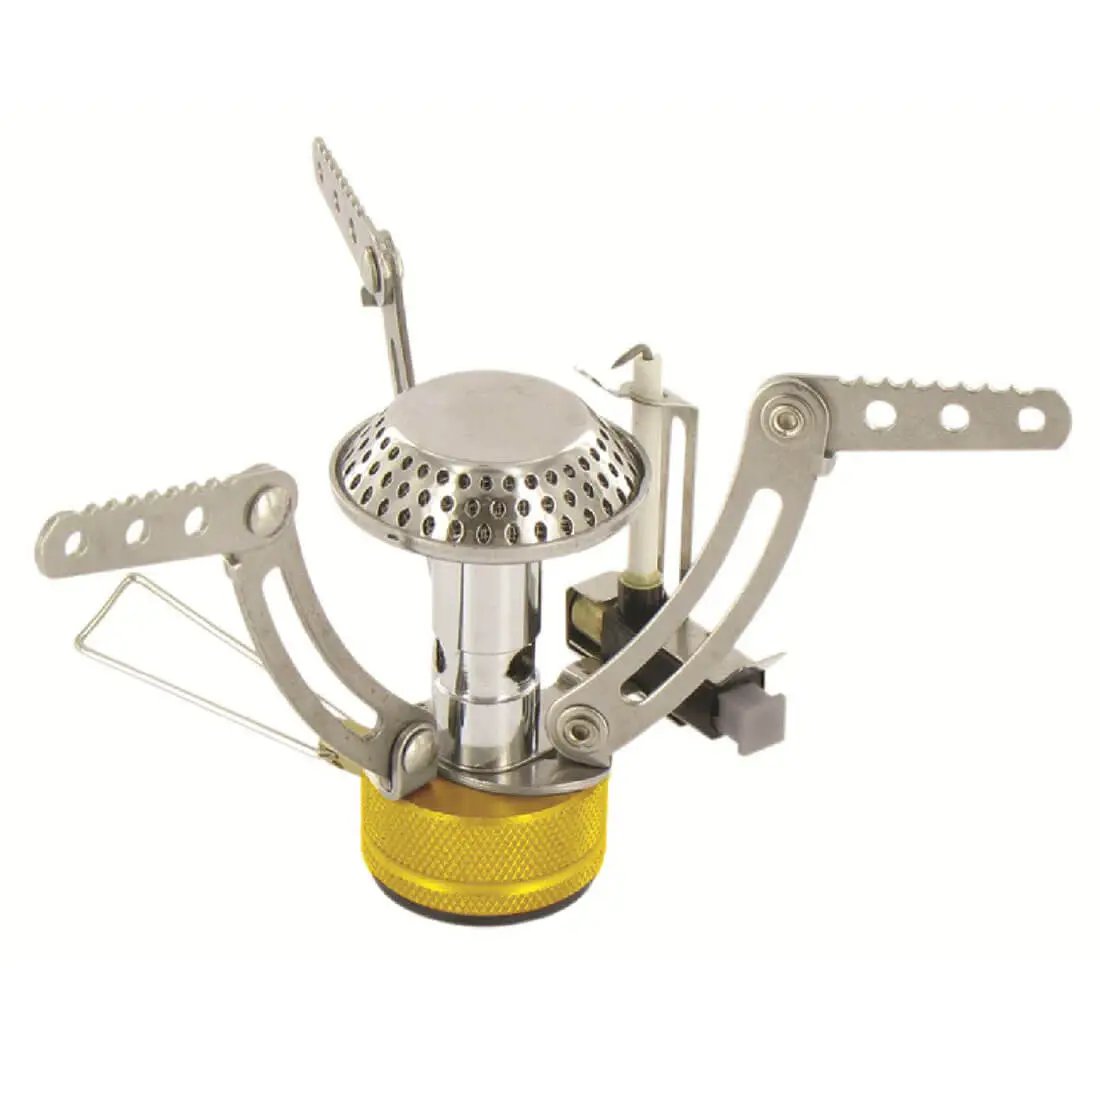 Highlander HPX200 Portable Lightweight & Compact Camping Stove - John Bull Clothing